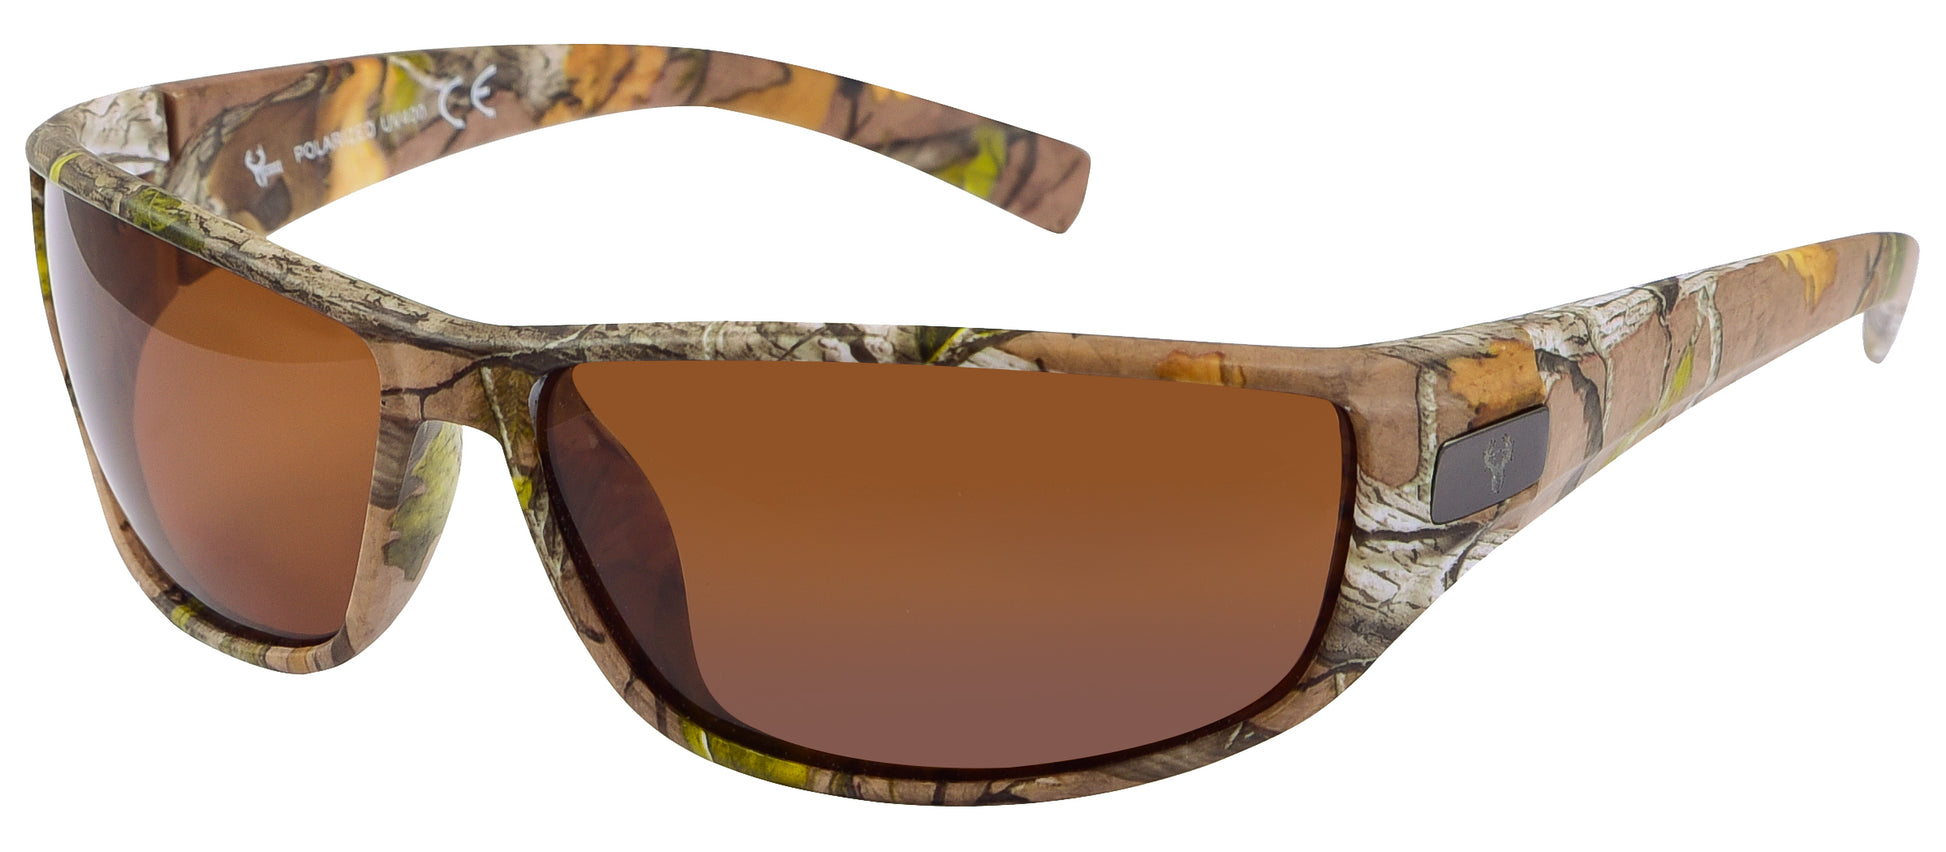 Hornz Brown Forest Camouflage Polarized Sunglasses for Men - WhiteTail -  Free Matching Microfiber Pouch - Brown Camo Frame - Amber Lens – Hornz Camo